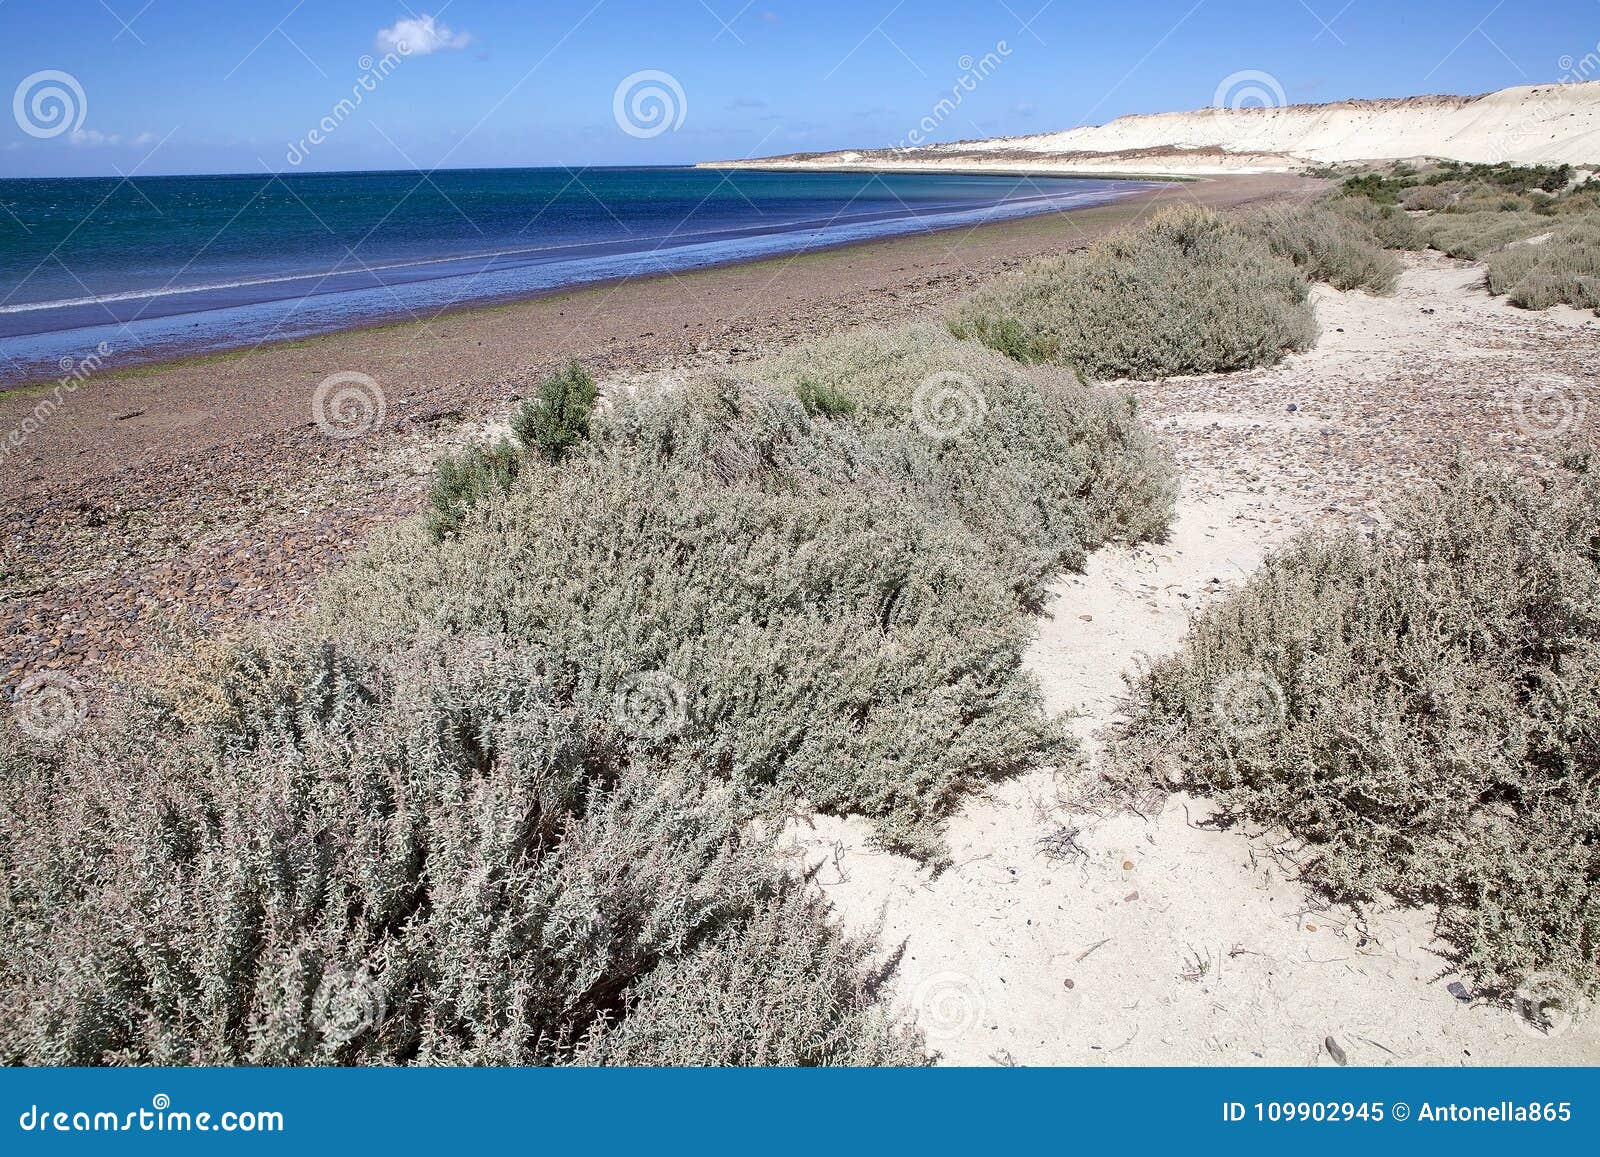 beach near puerto madryn, a city in chubut province, patagonia, argentina